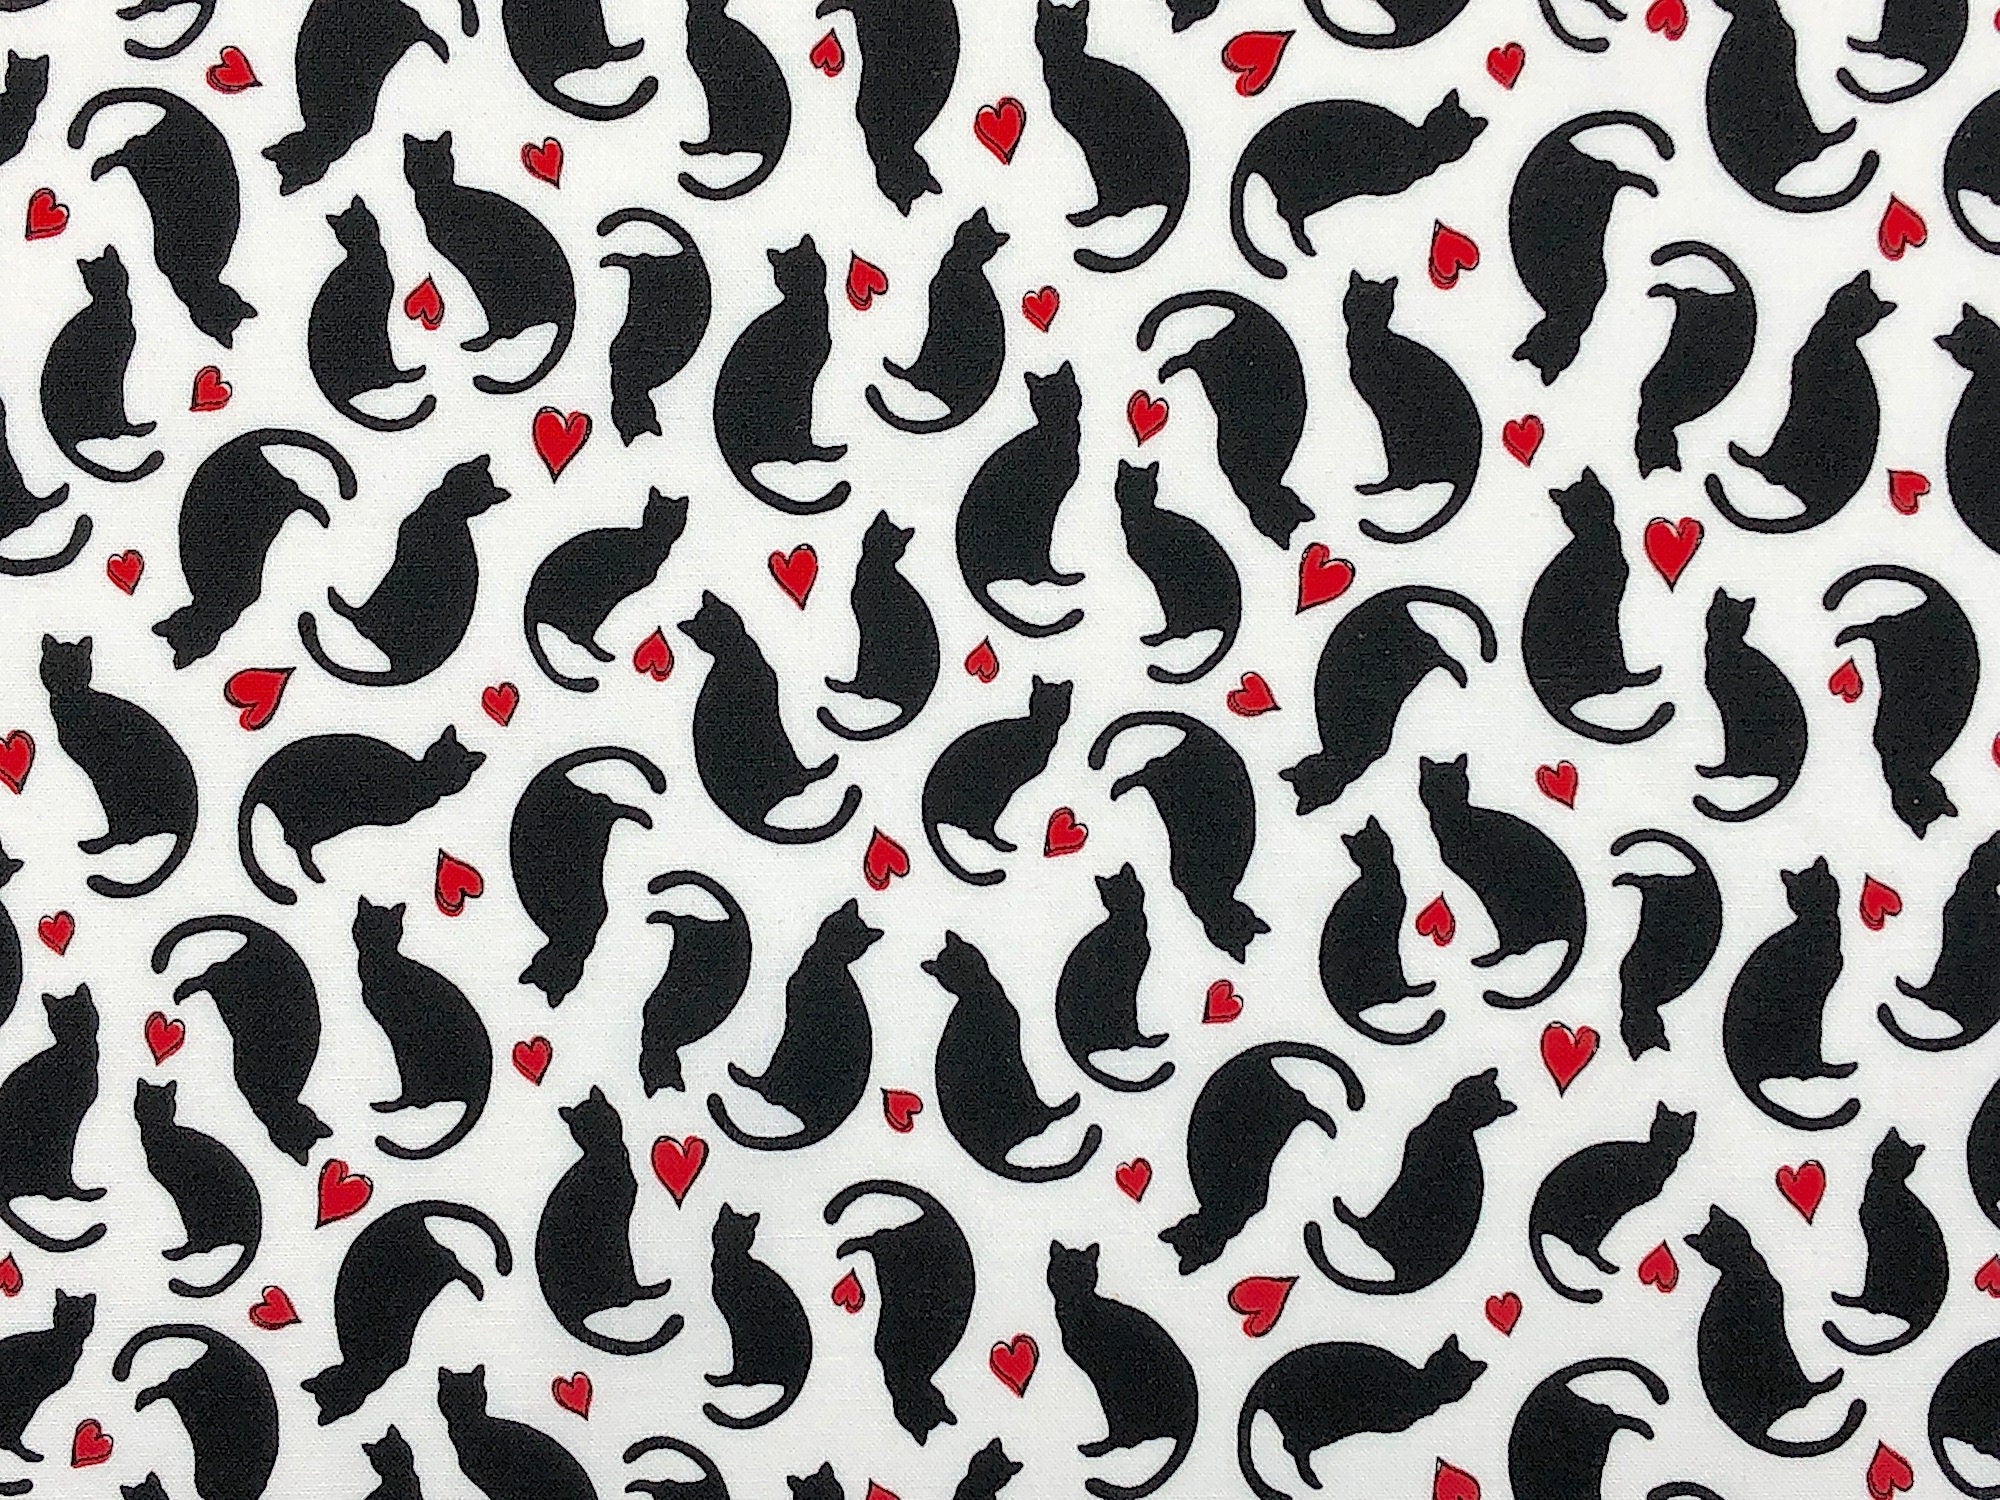 This fabric is called Parisian Cats with Hearts. This white fabric is covered with black cats and red hearts.